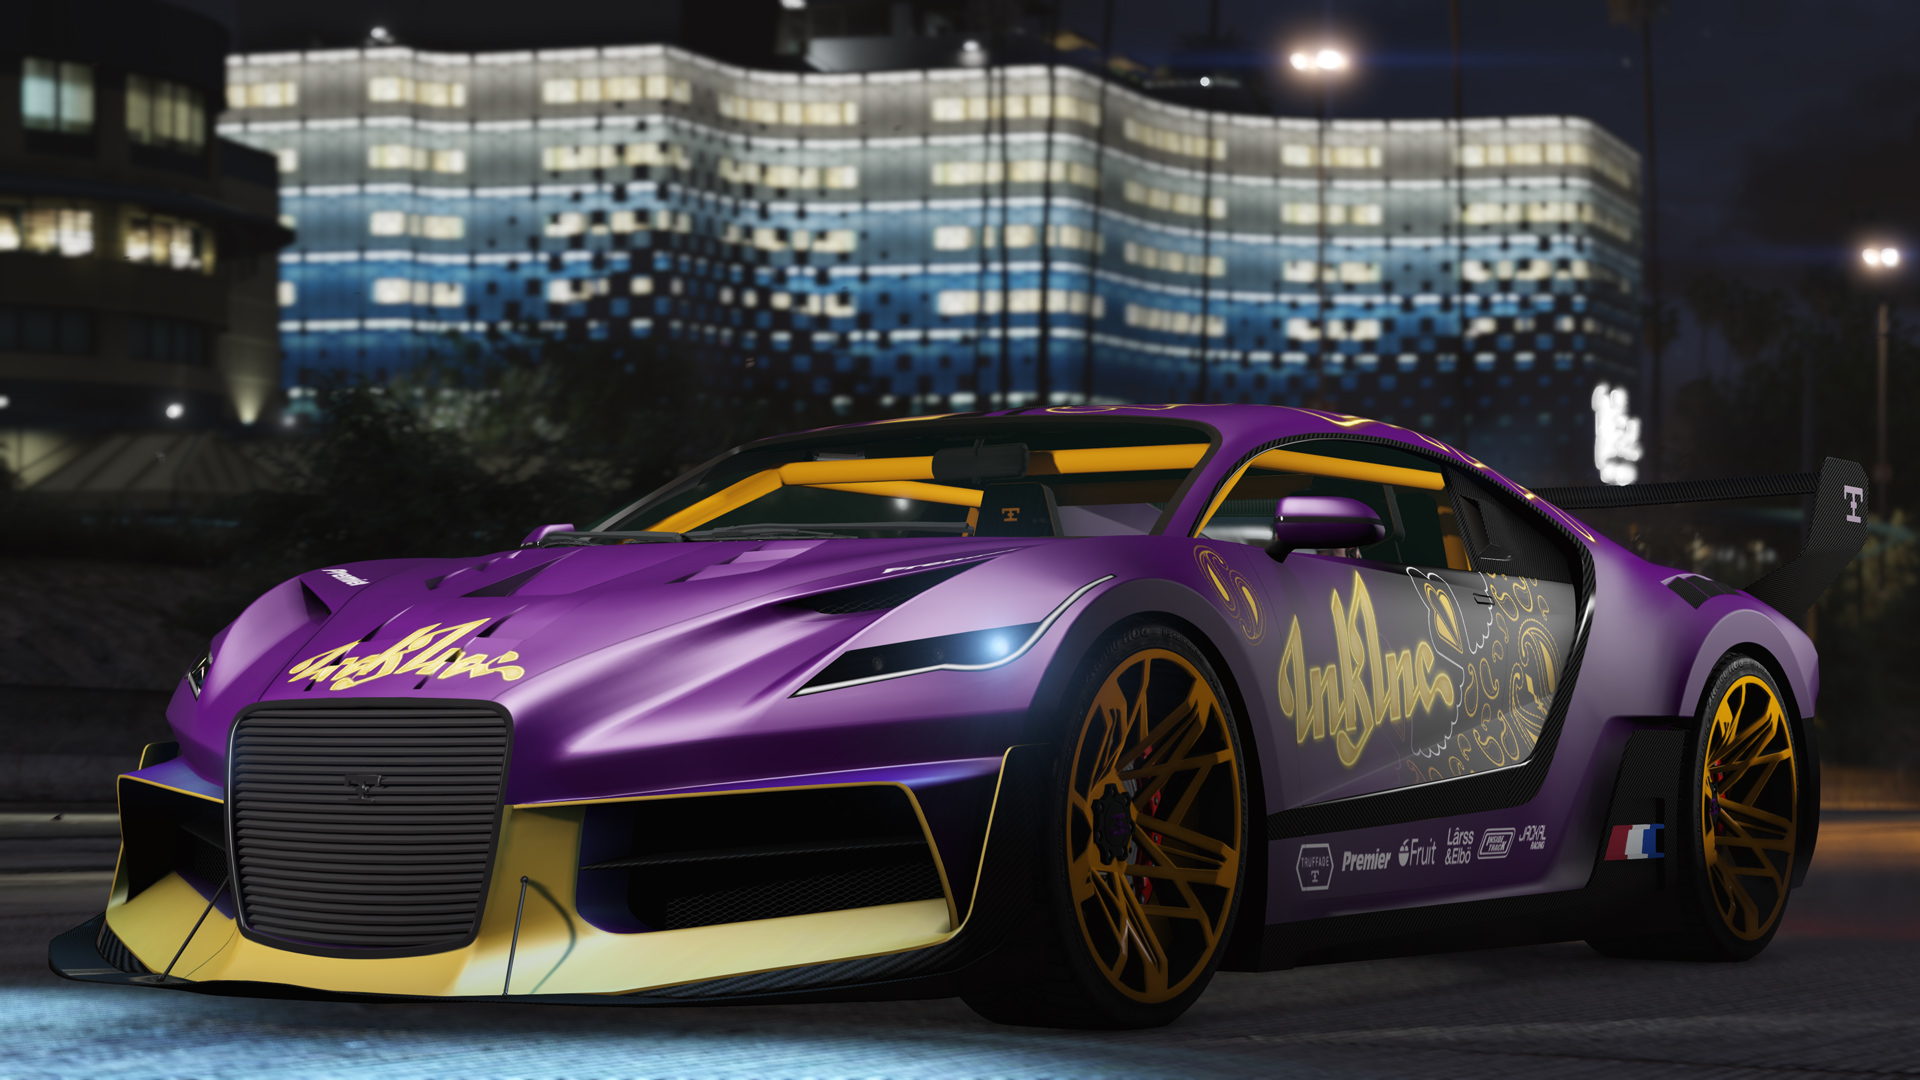 GTA casino cars all the new vehicles in the GTA Online DLC listed